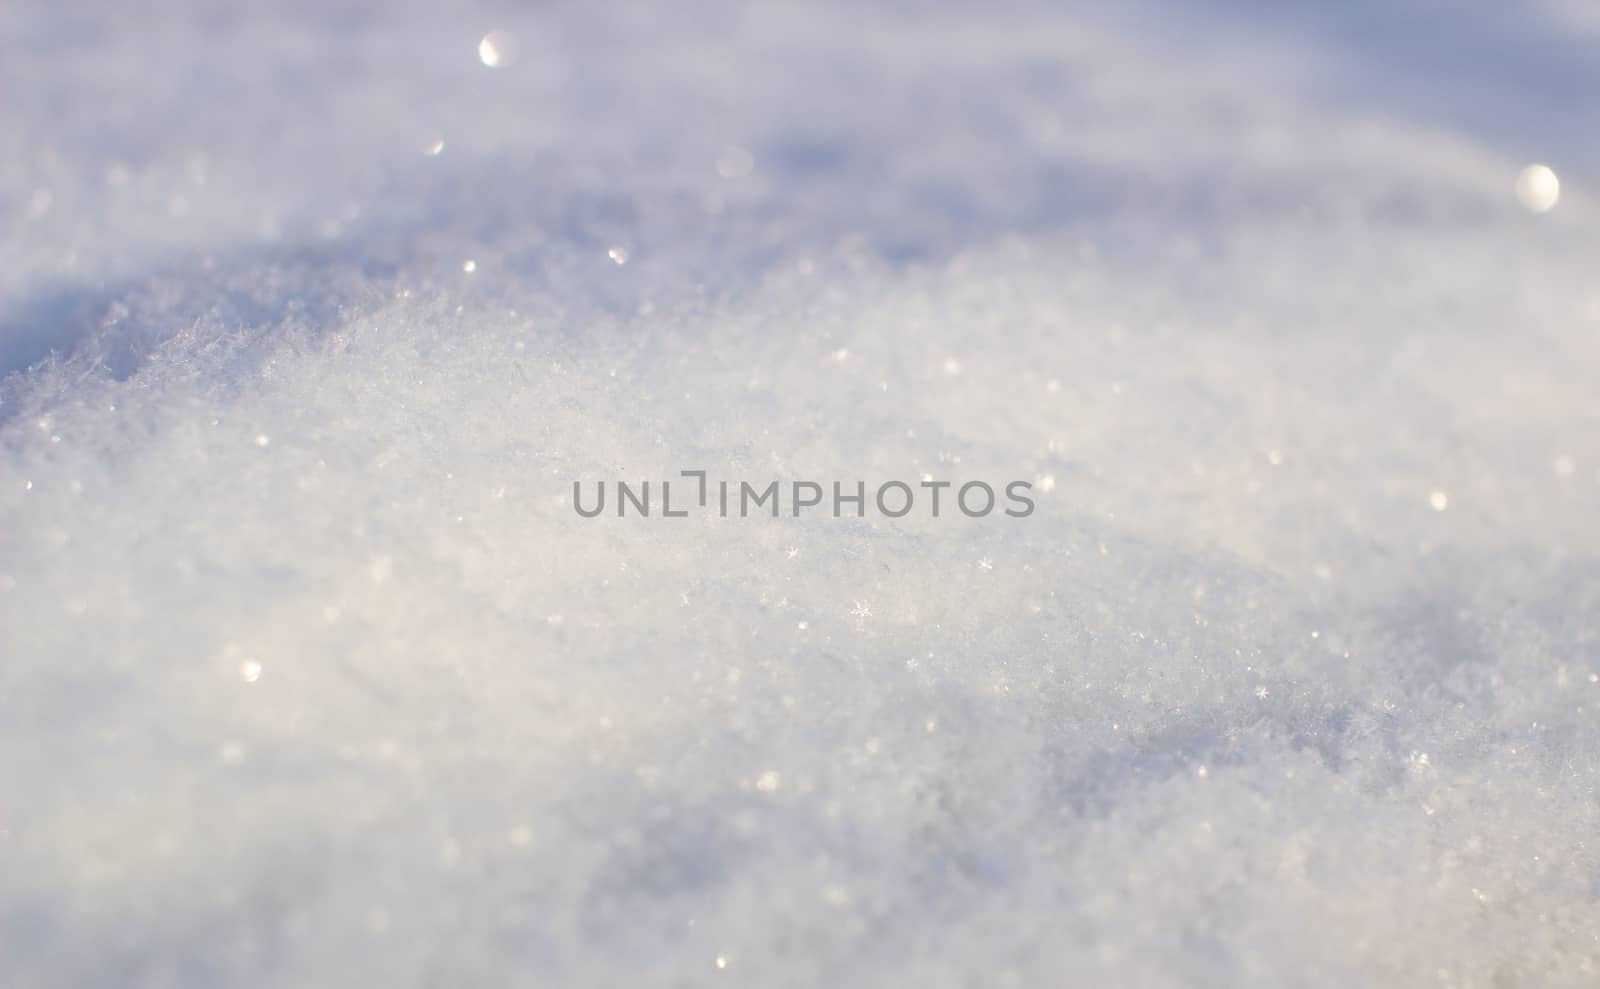 Clean, white snow close-up. Winter background. High quality photo